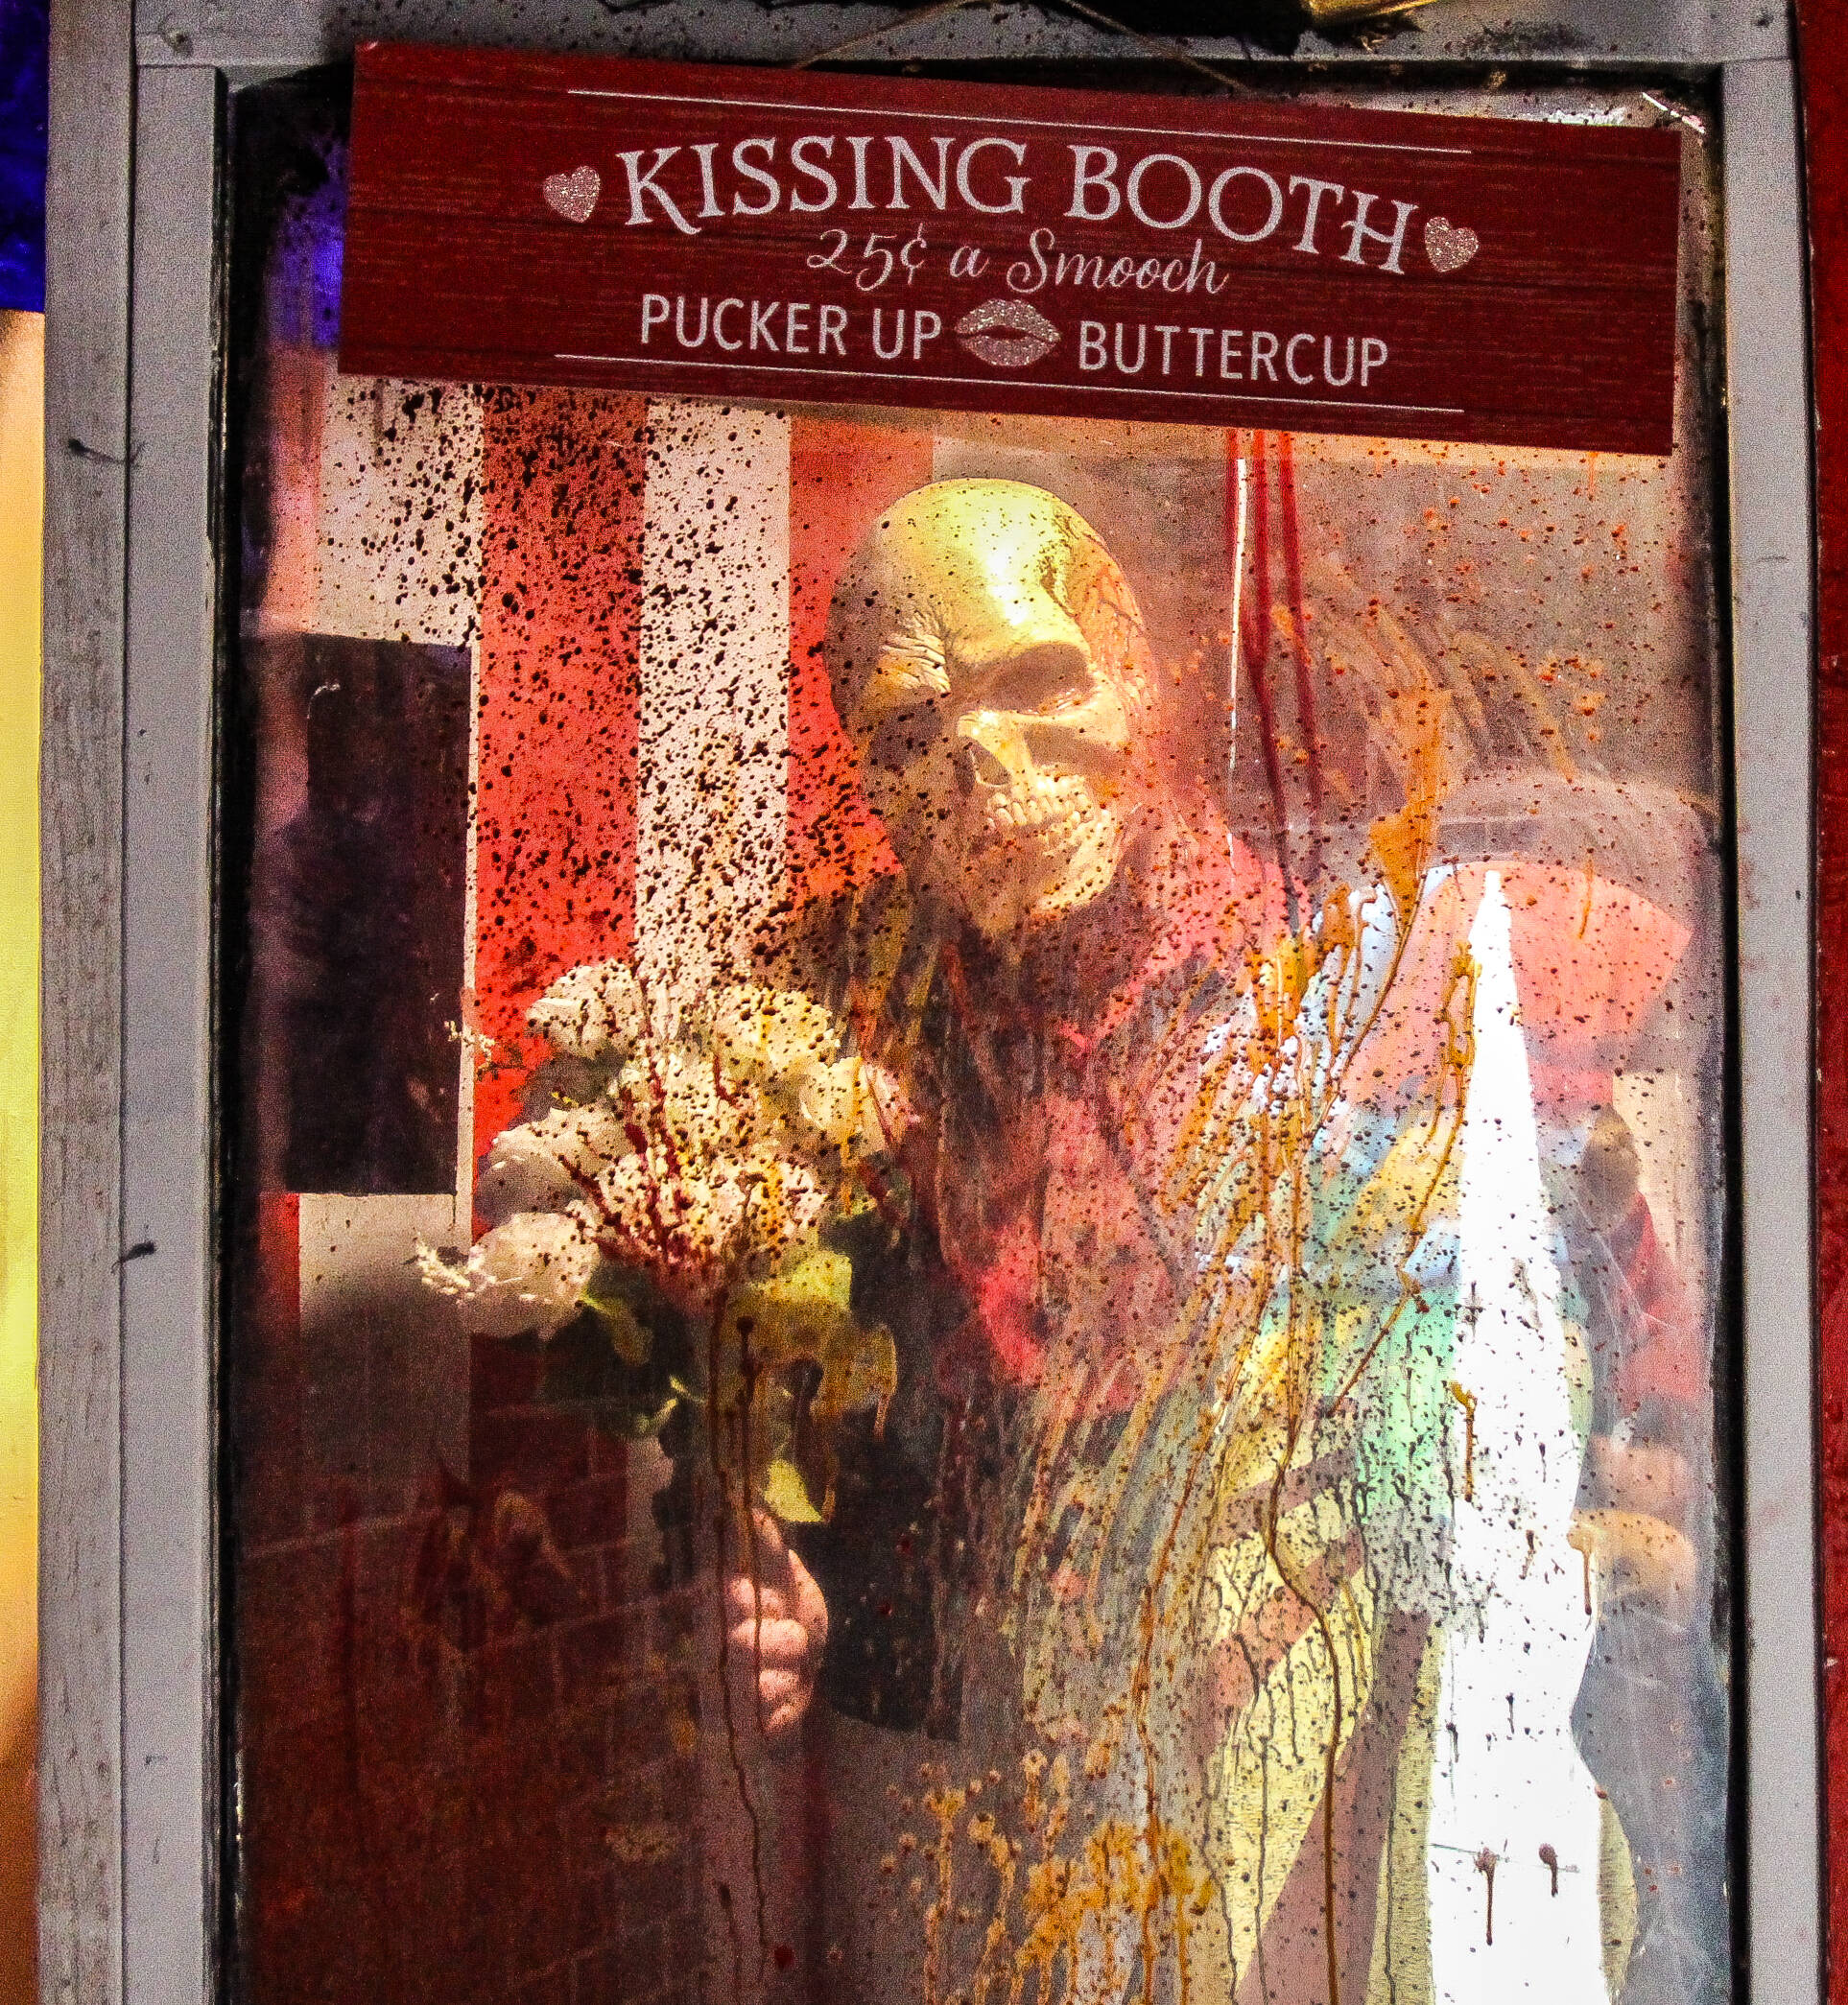 Jack Twist is dying to meet his true love in the kissing booth. (Photo by Luisa Loi)